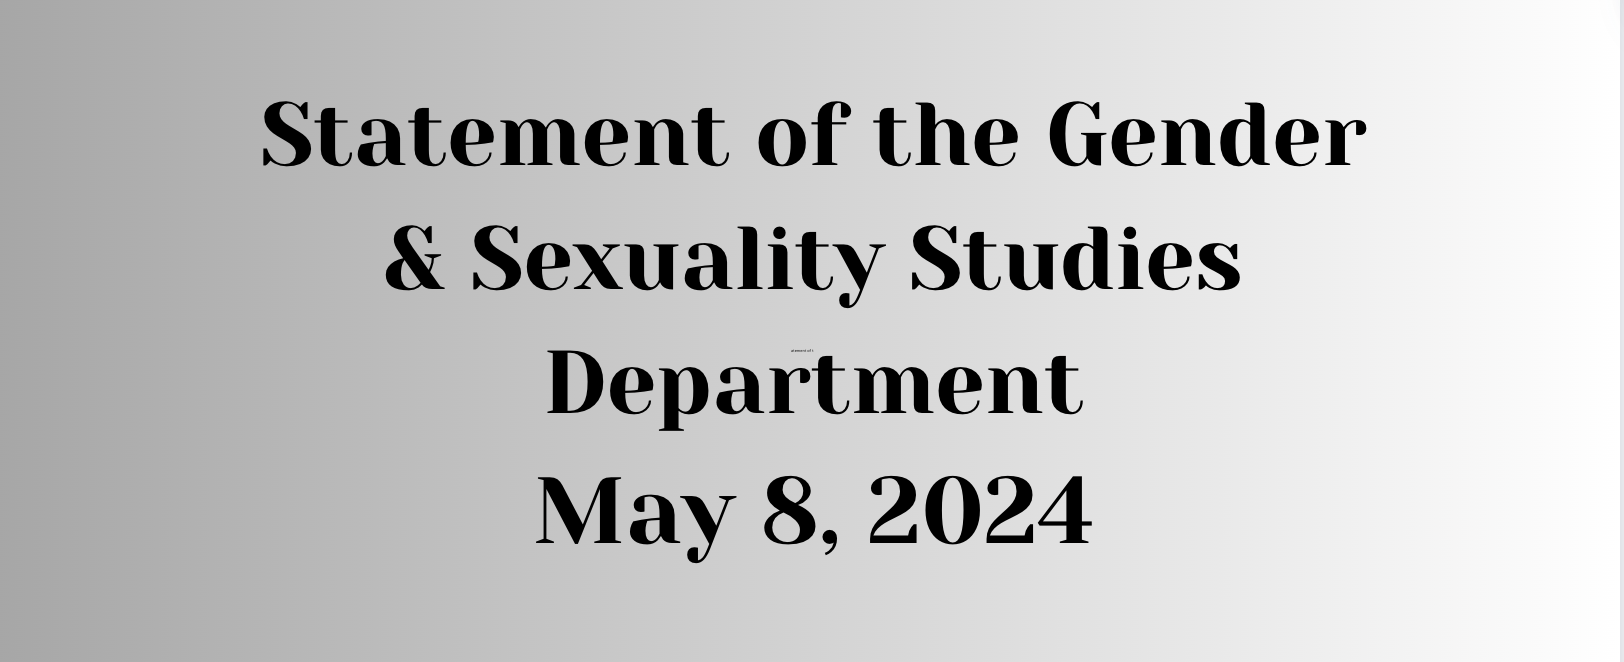 Statement of the Gender & Sexuality Studies Department, May 8, 2024